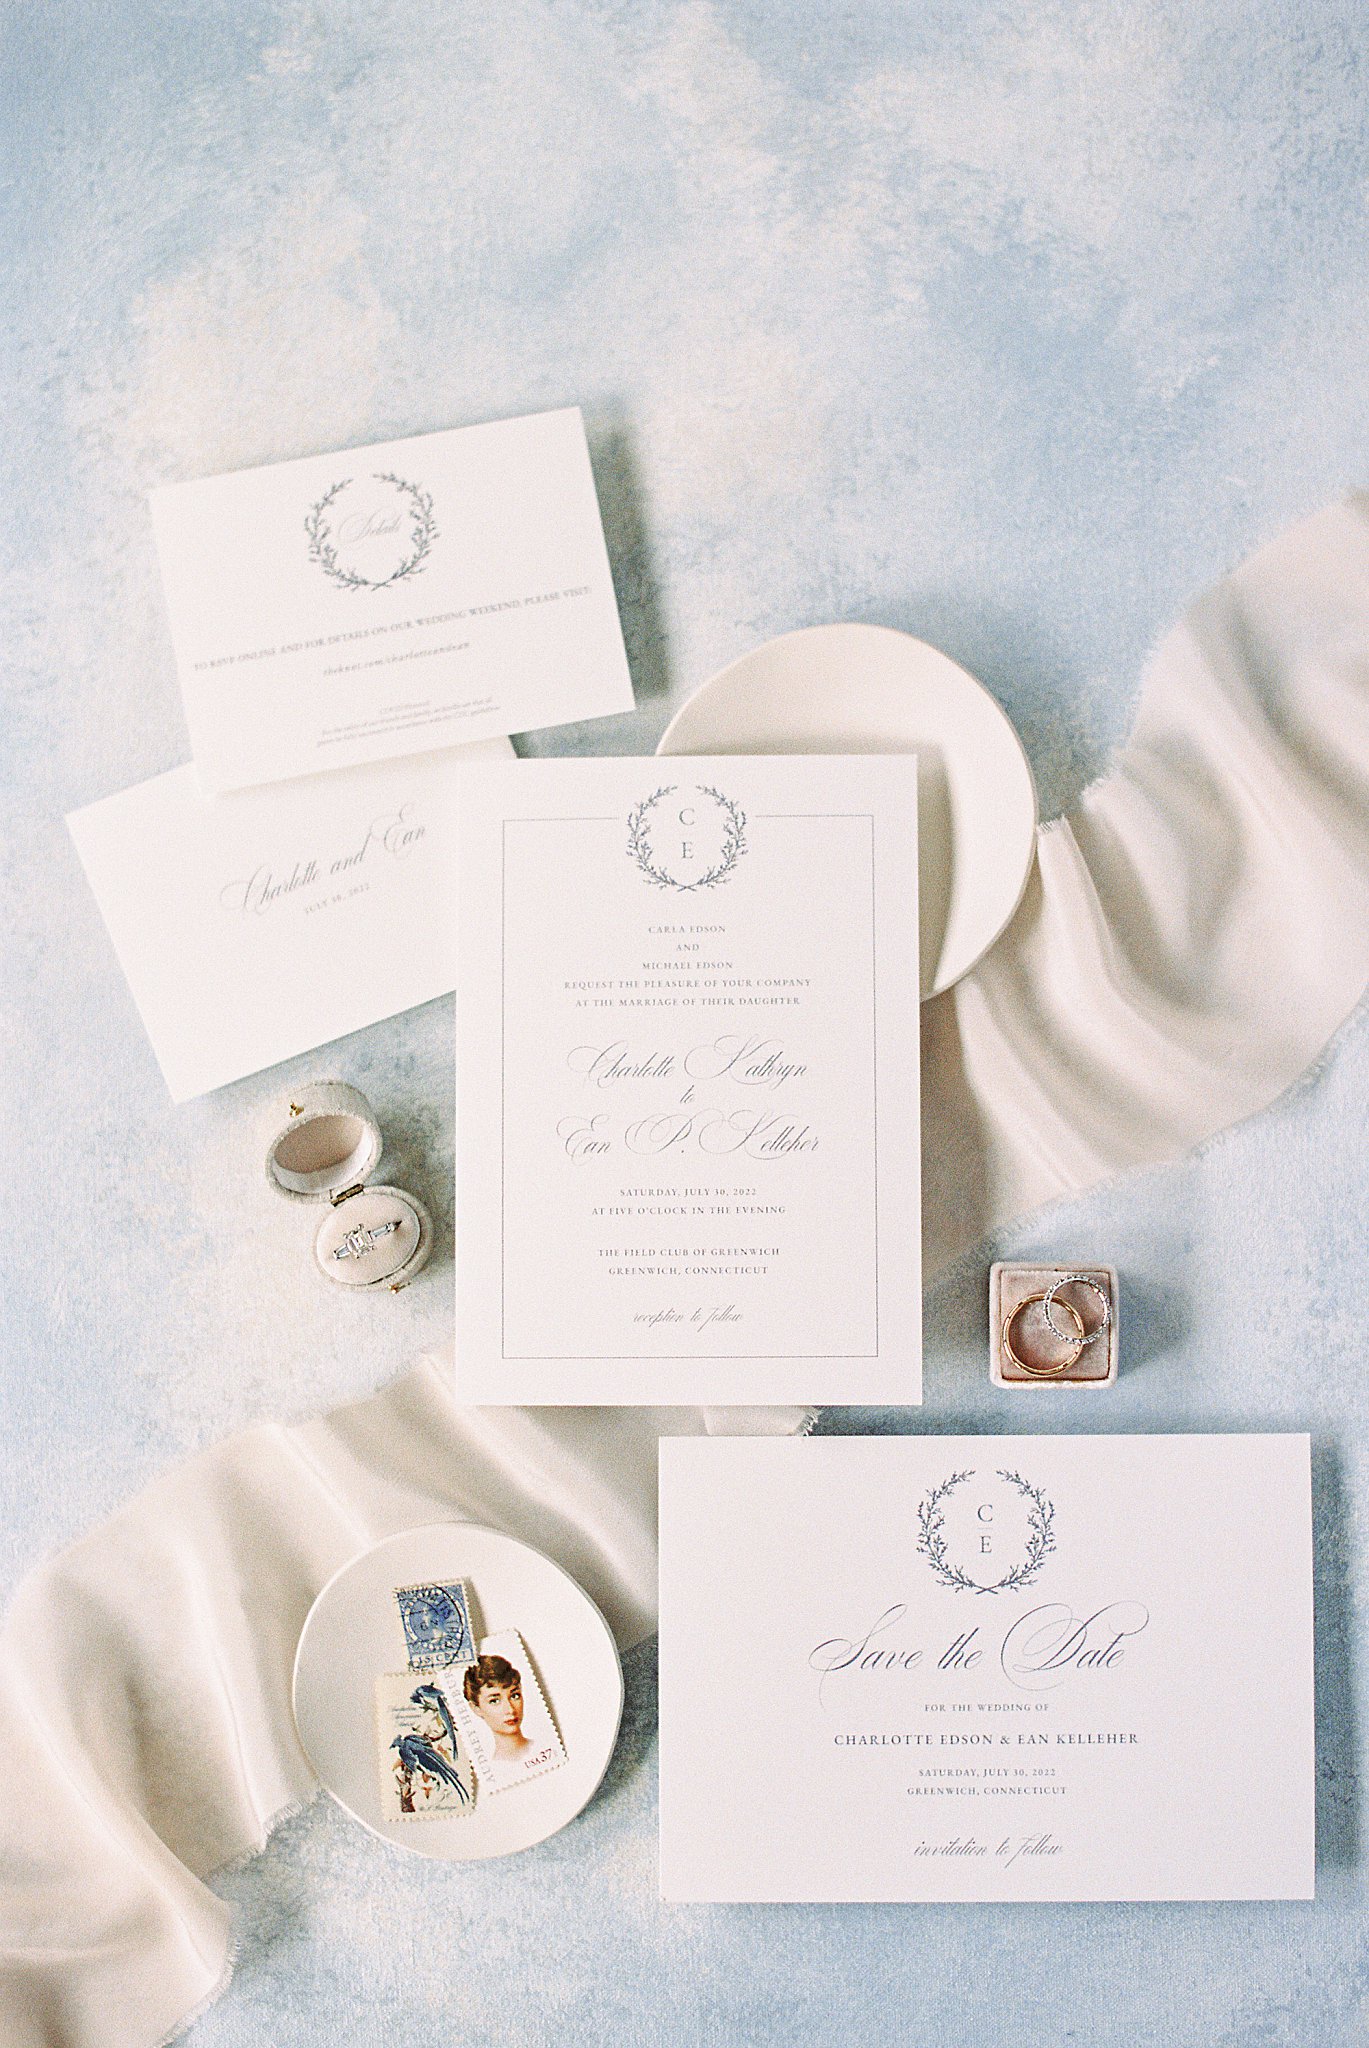 invitation suite laid out with rings by Cape Cod wedding photographer